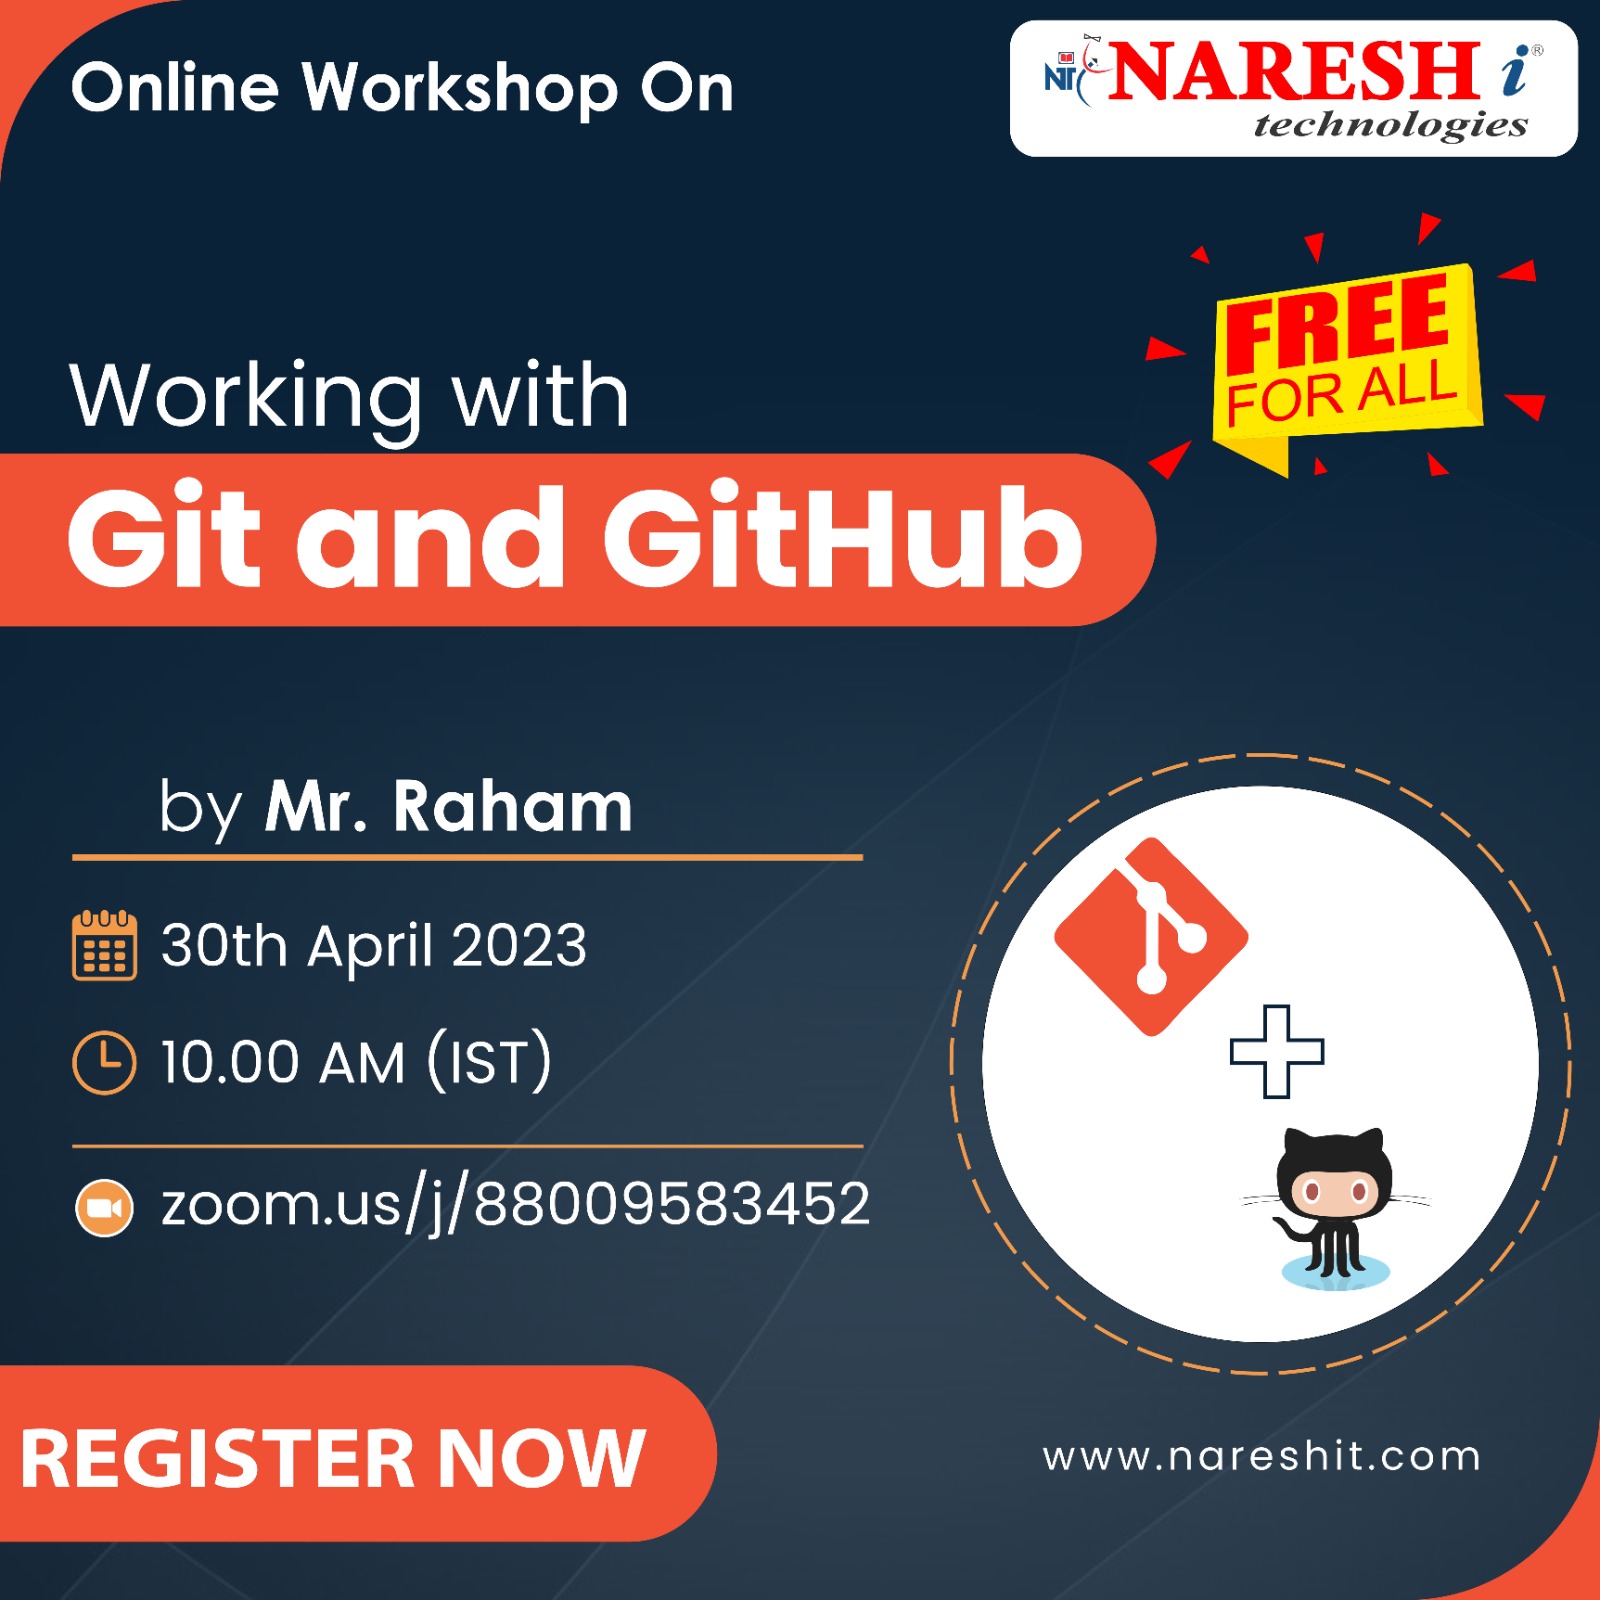 Free Workshop on Git and GitHub, Online Event